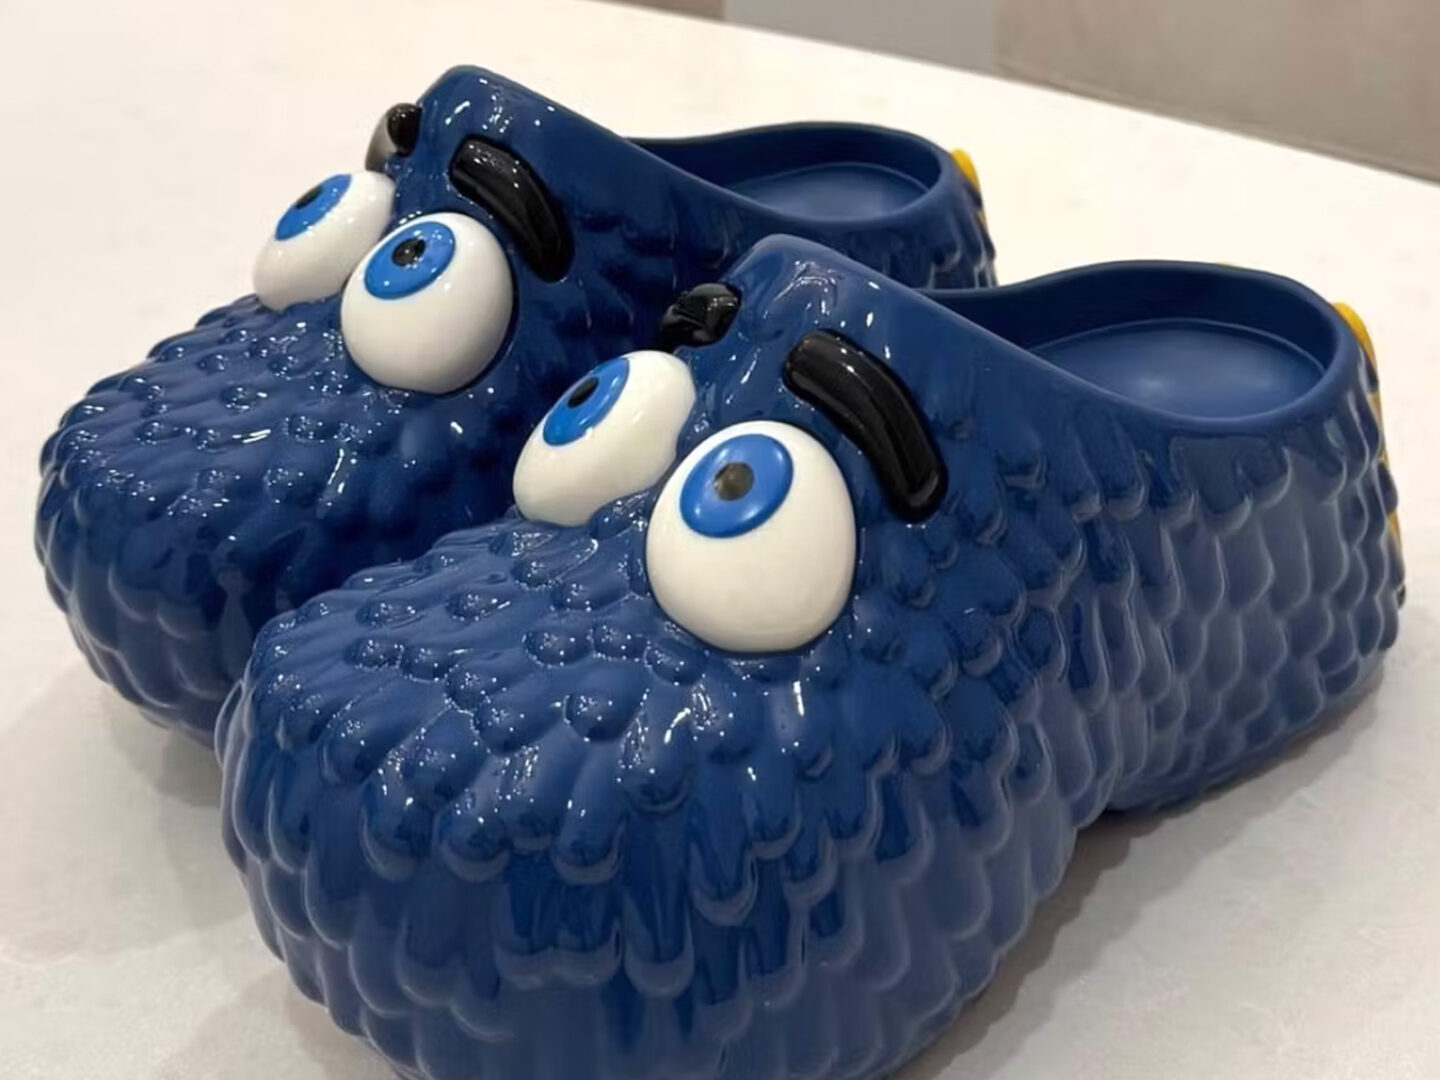 Kerwin Frost designs eccentric 'Fry Guy' clogs for McDonald's - HIGHXTAR.